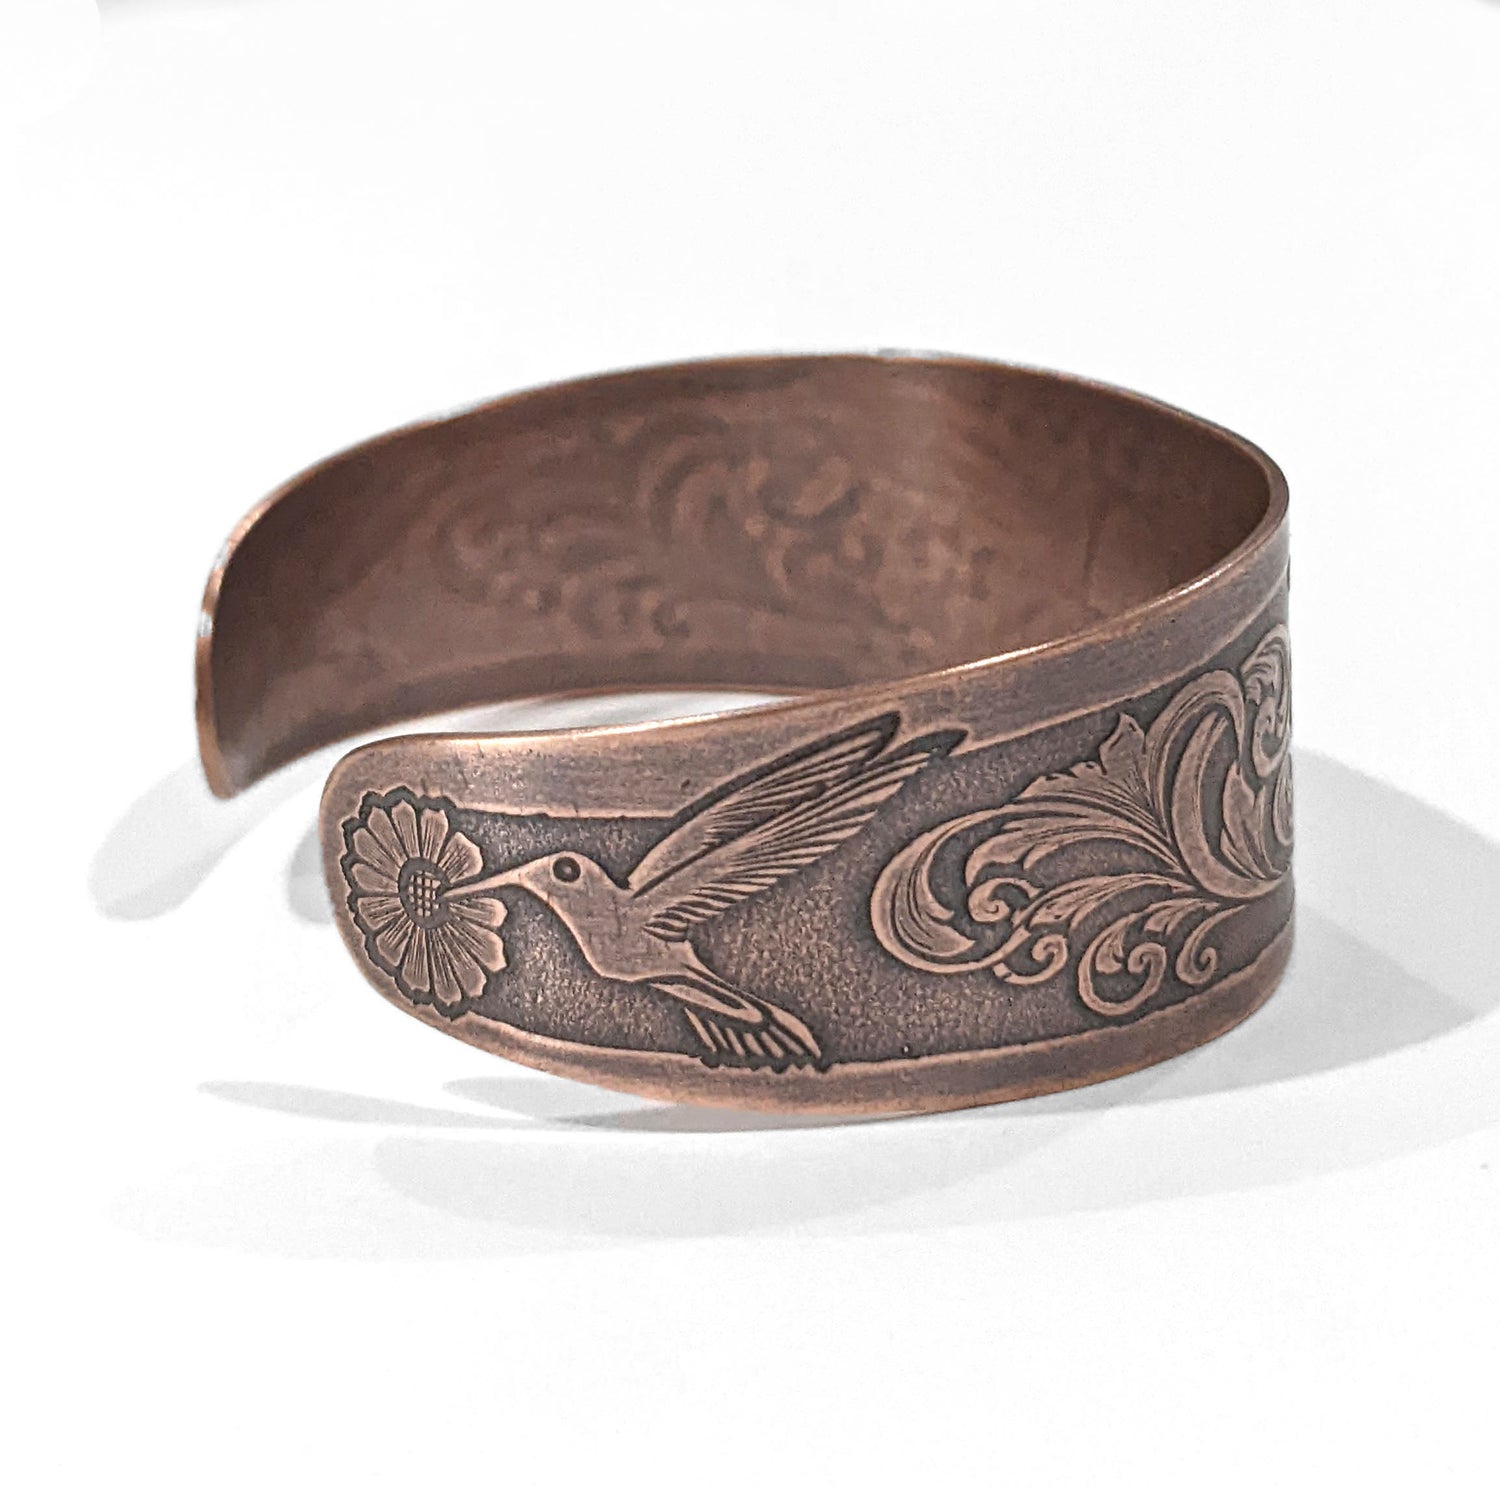 Copper cuff bracelet with hummingbirds and flowers. The main scene is a hummingbird in flight drinking nectar from one of a field of flowers. At each end of the cuff there is a smaller hummingbird drinking from a single flower. The cuff is tapered, just under and inch wide at the center tapering to one half inch at the ends. This is side view showing the smaller hummingbird.